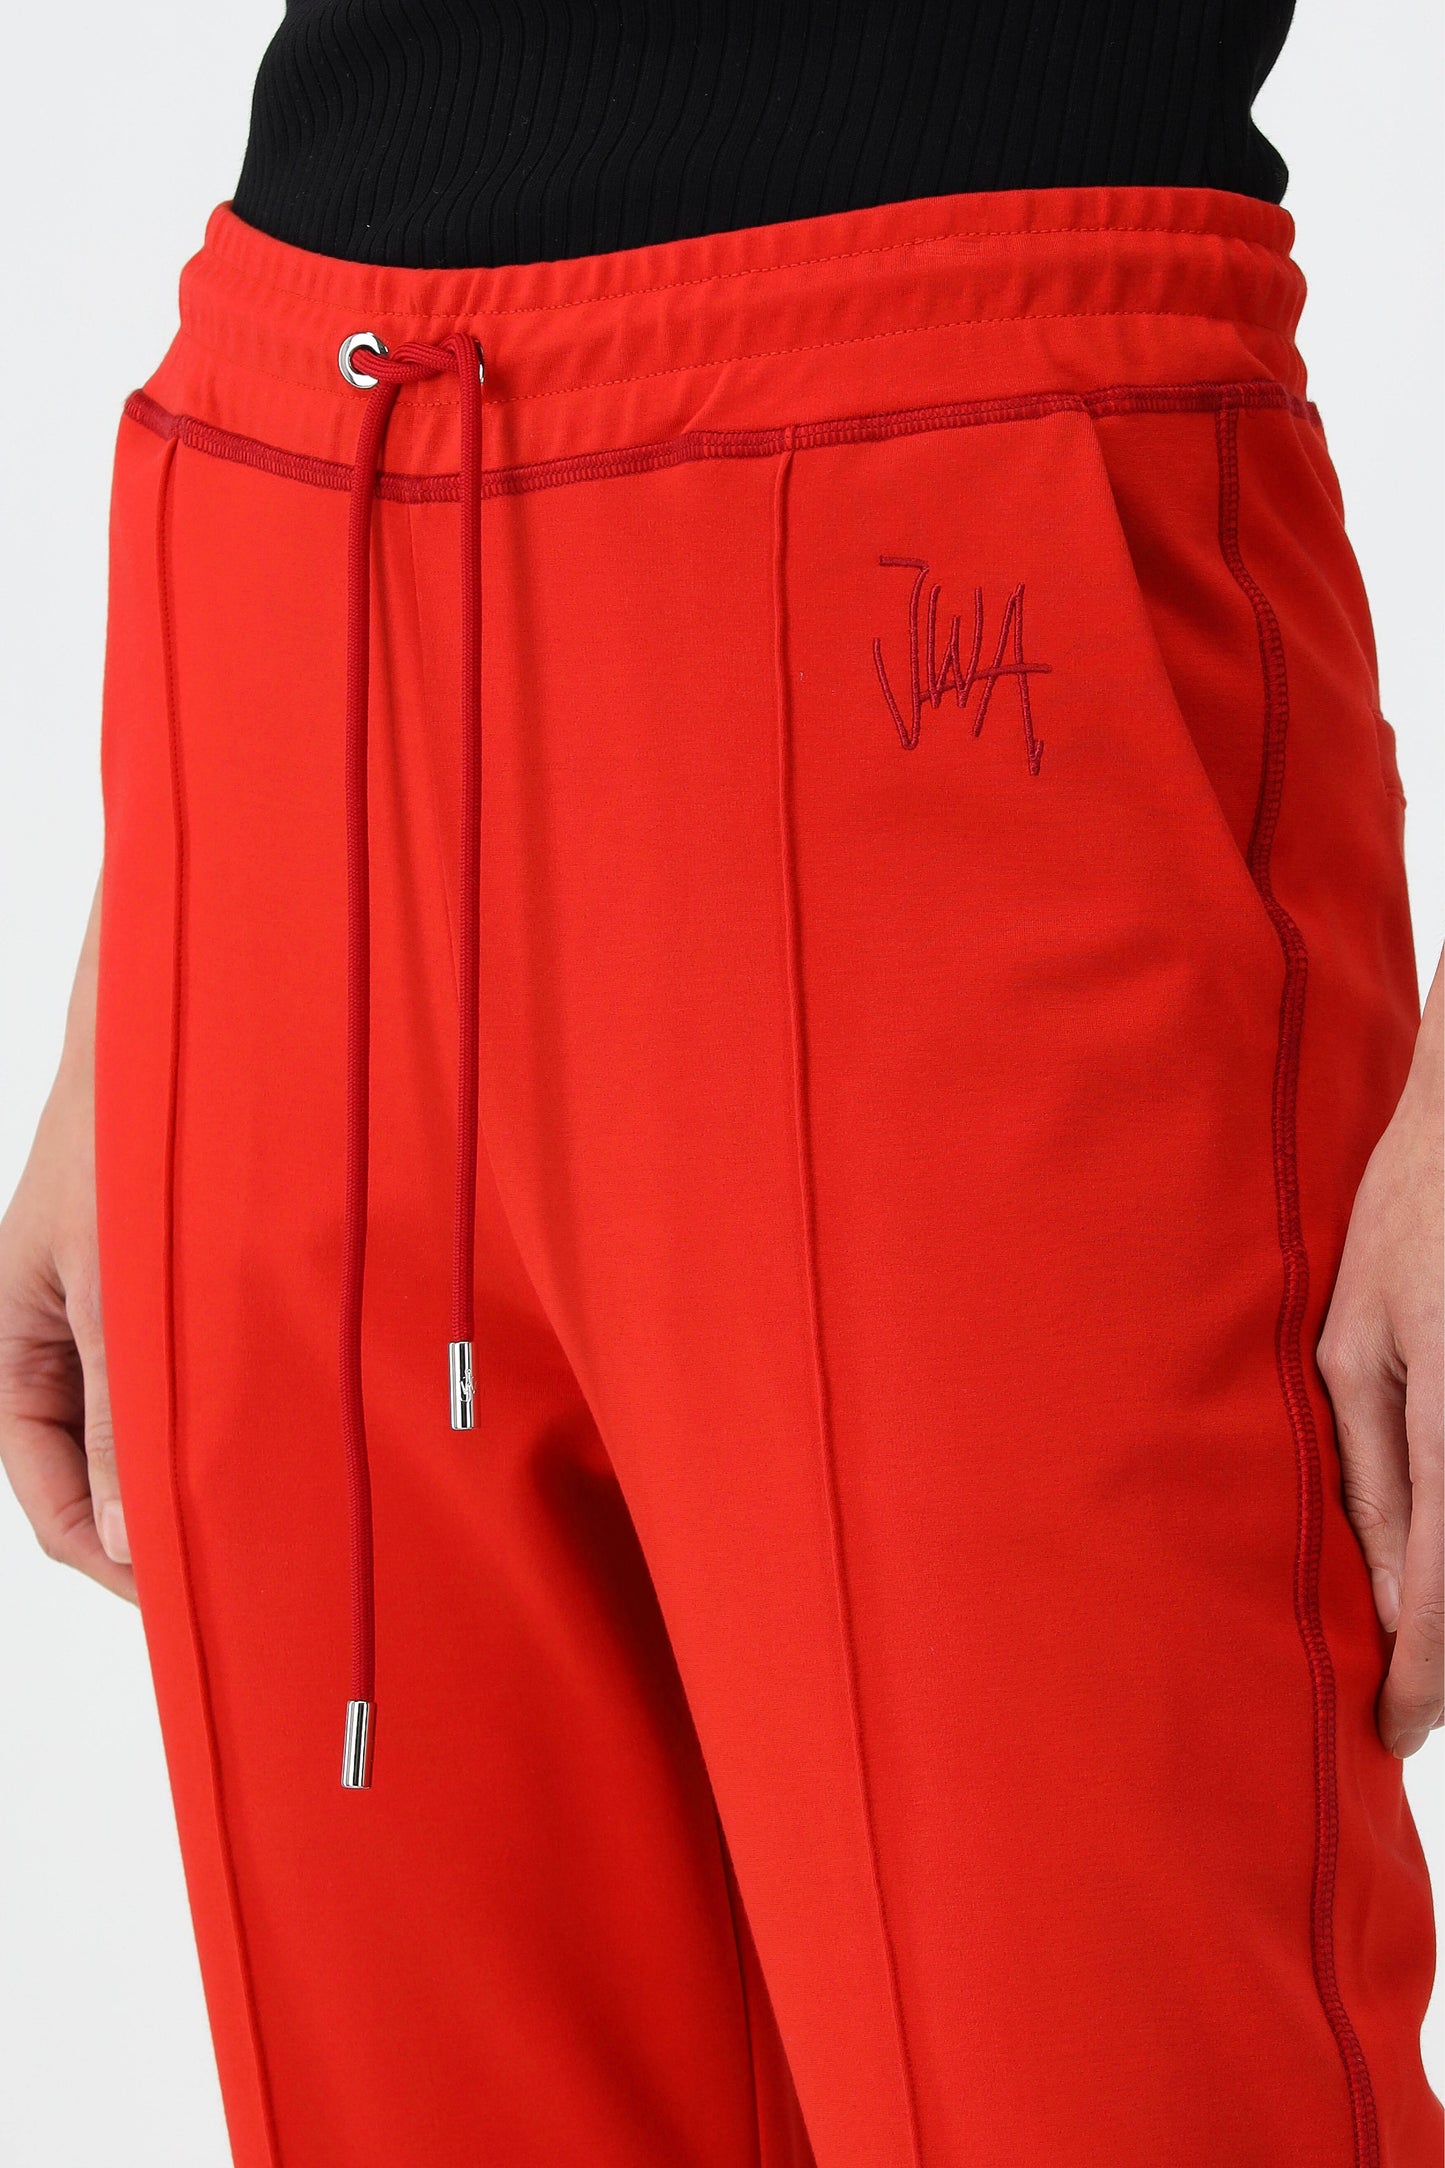 Trackpants Slim Flare in RotJW Anderson - Anita Hass